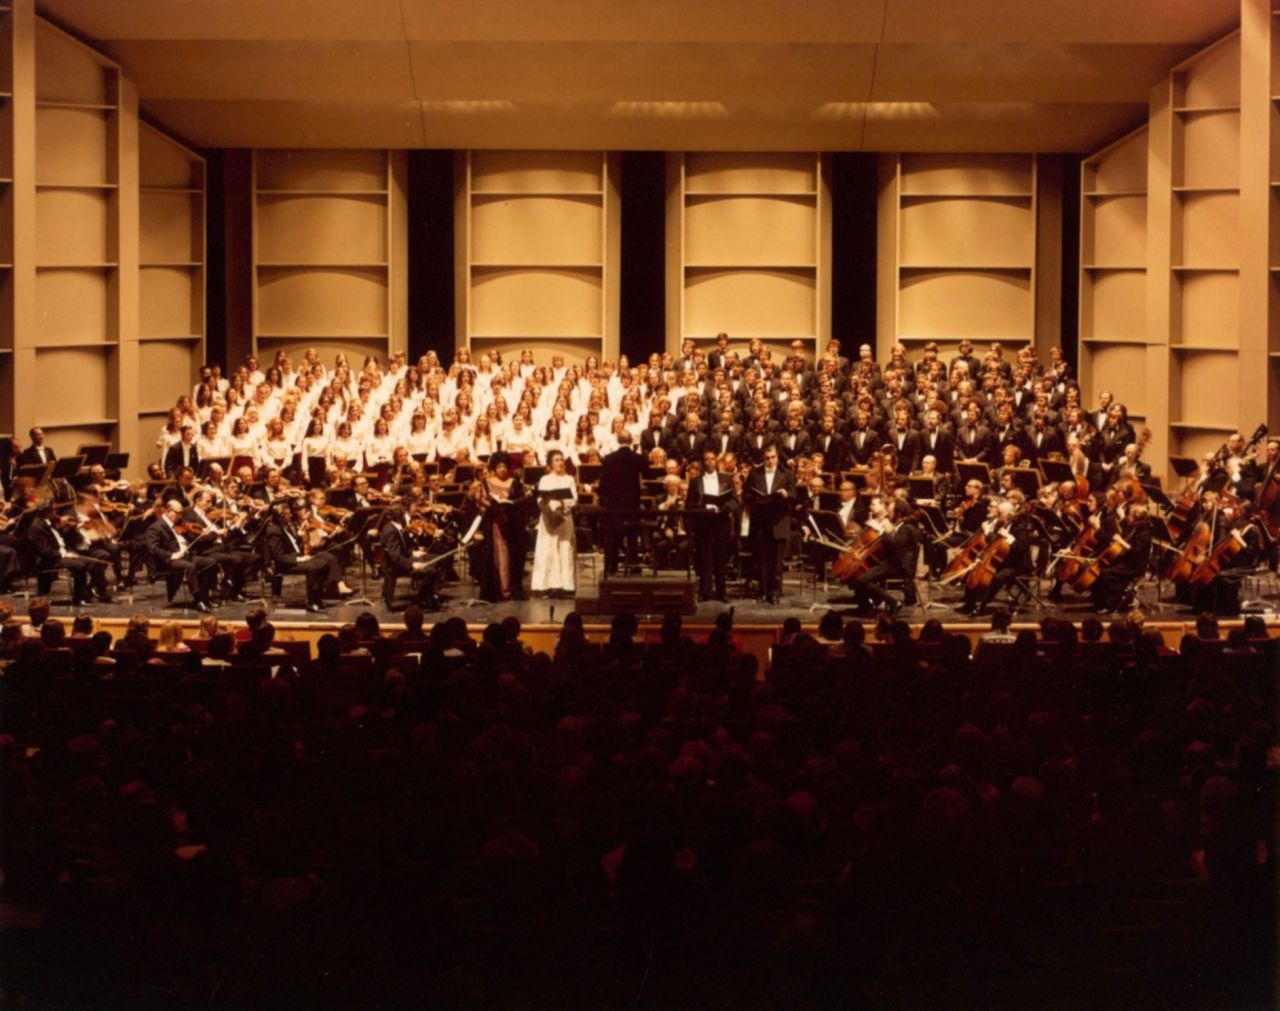 Numerous choruses and classical musicians stand in rows on a stage.